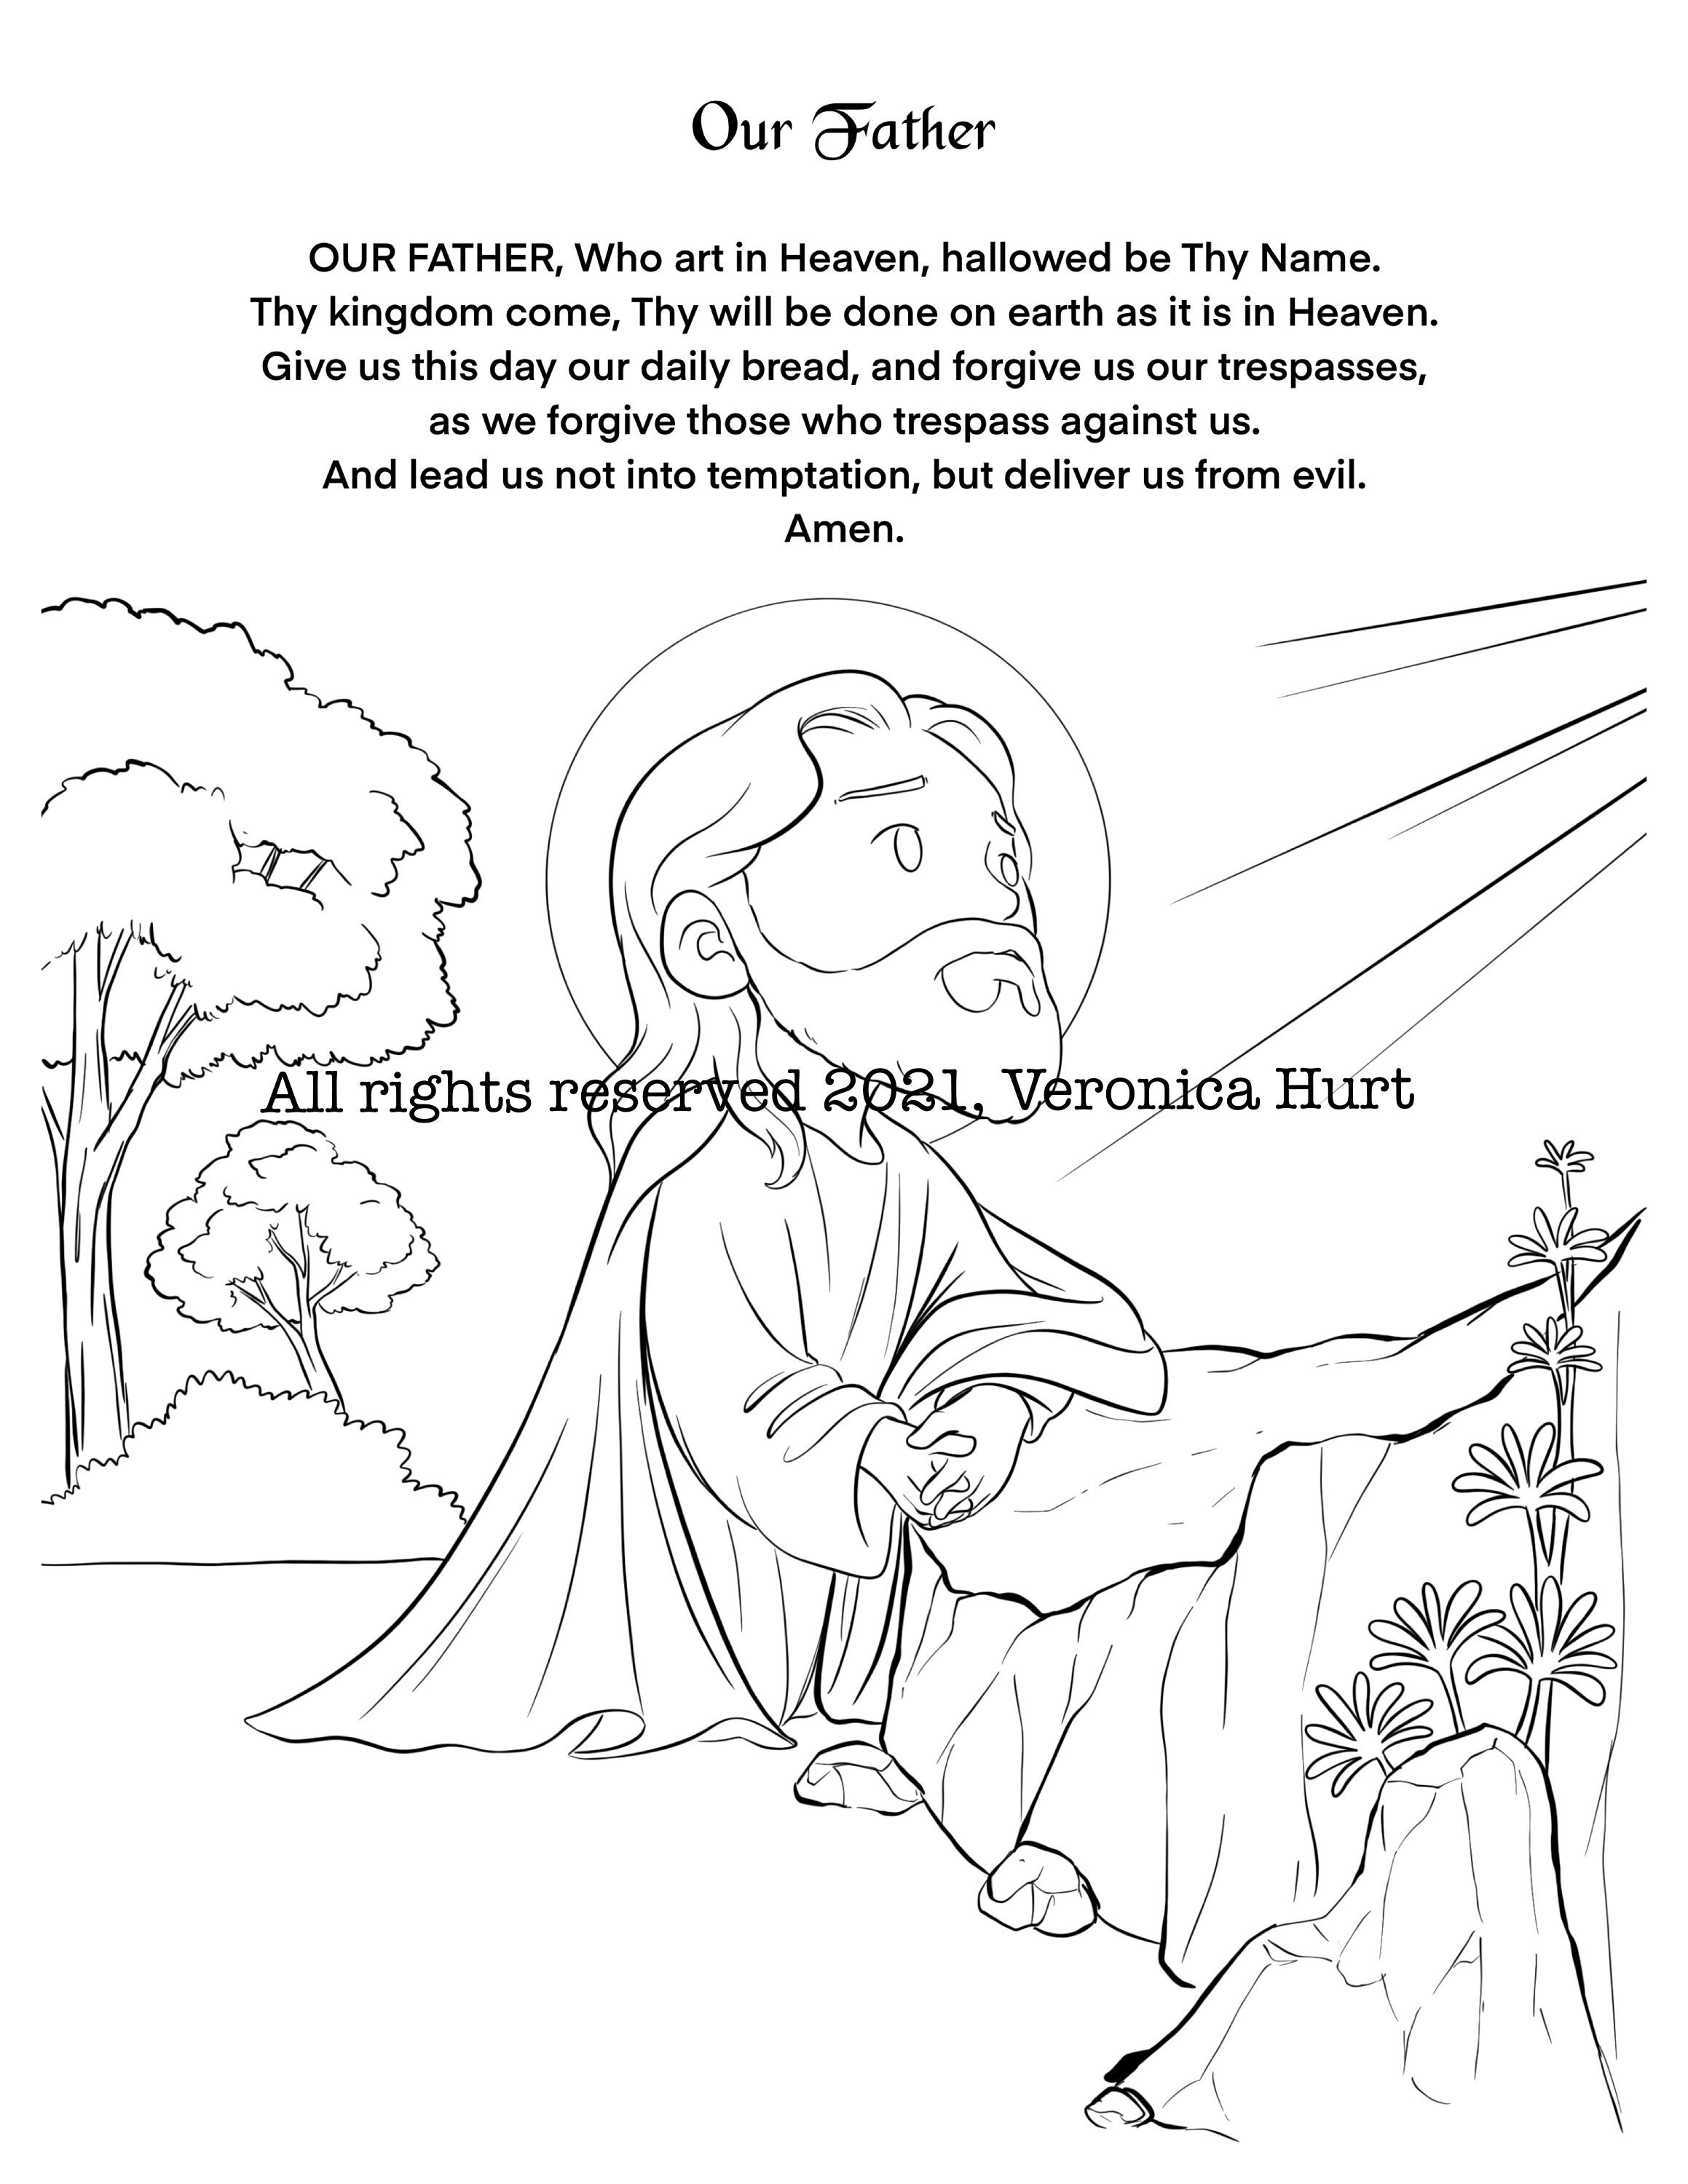 Our Father Prayer Learning Resource for Kids Coloring Page - Etsy